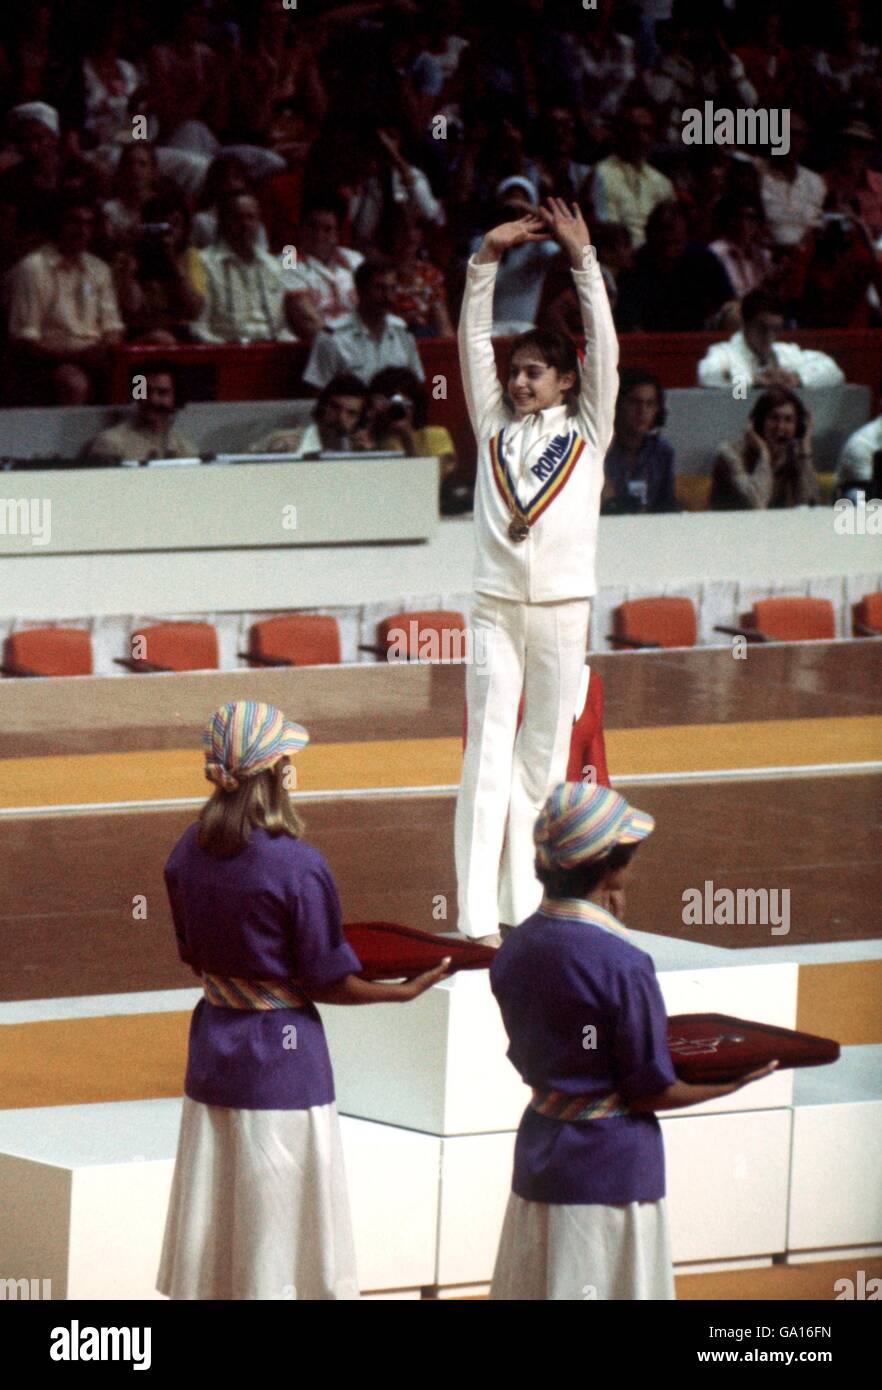 Romania's Nadia Comaneci waves to the crowd as she steps onto the podium to receive her gold medal Stock Photo